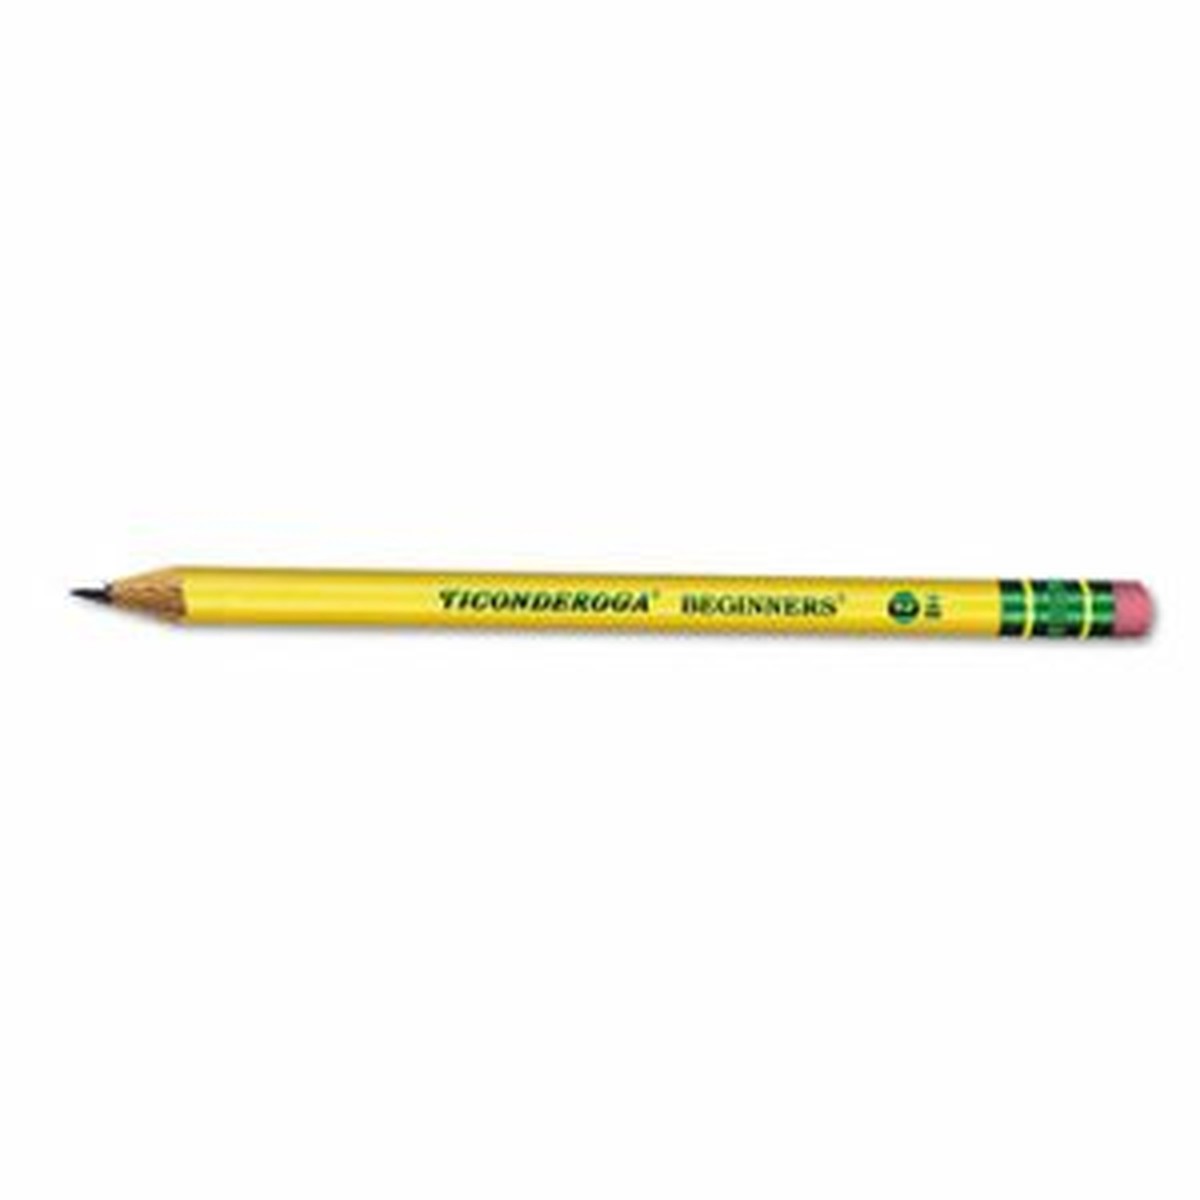 Beginners Pencils with Eraser, Pack of 12